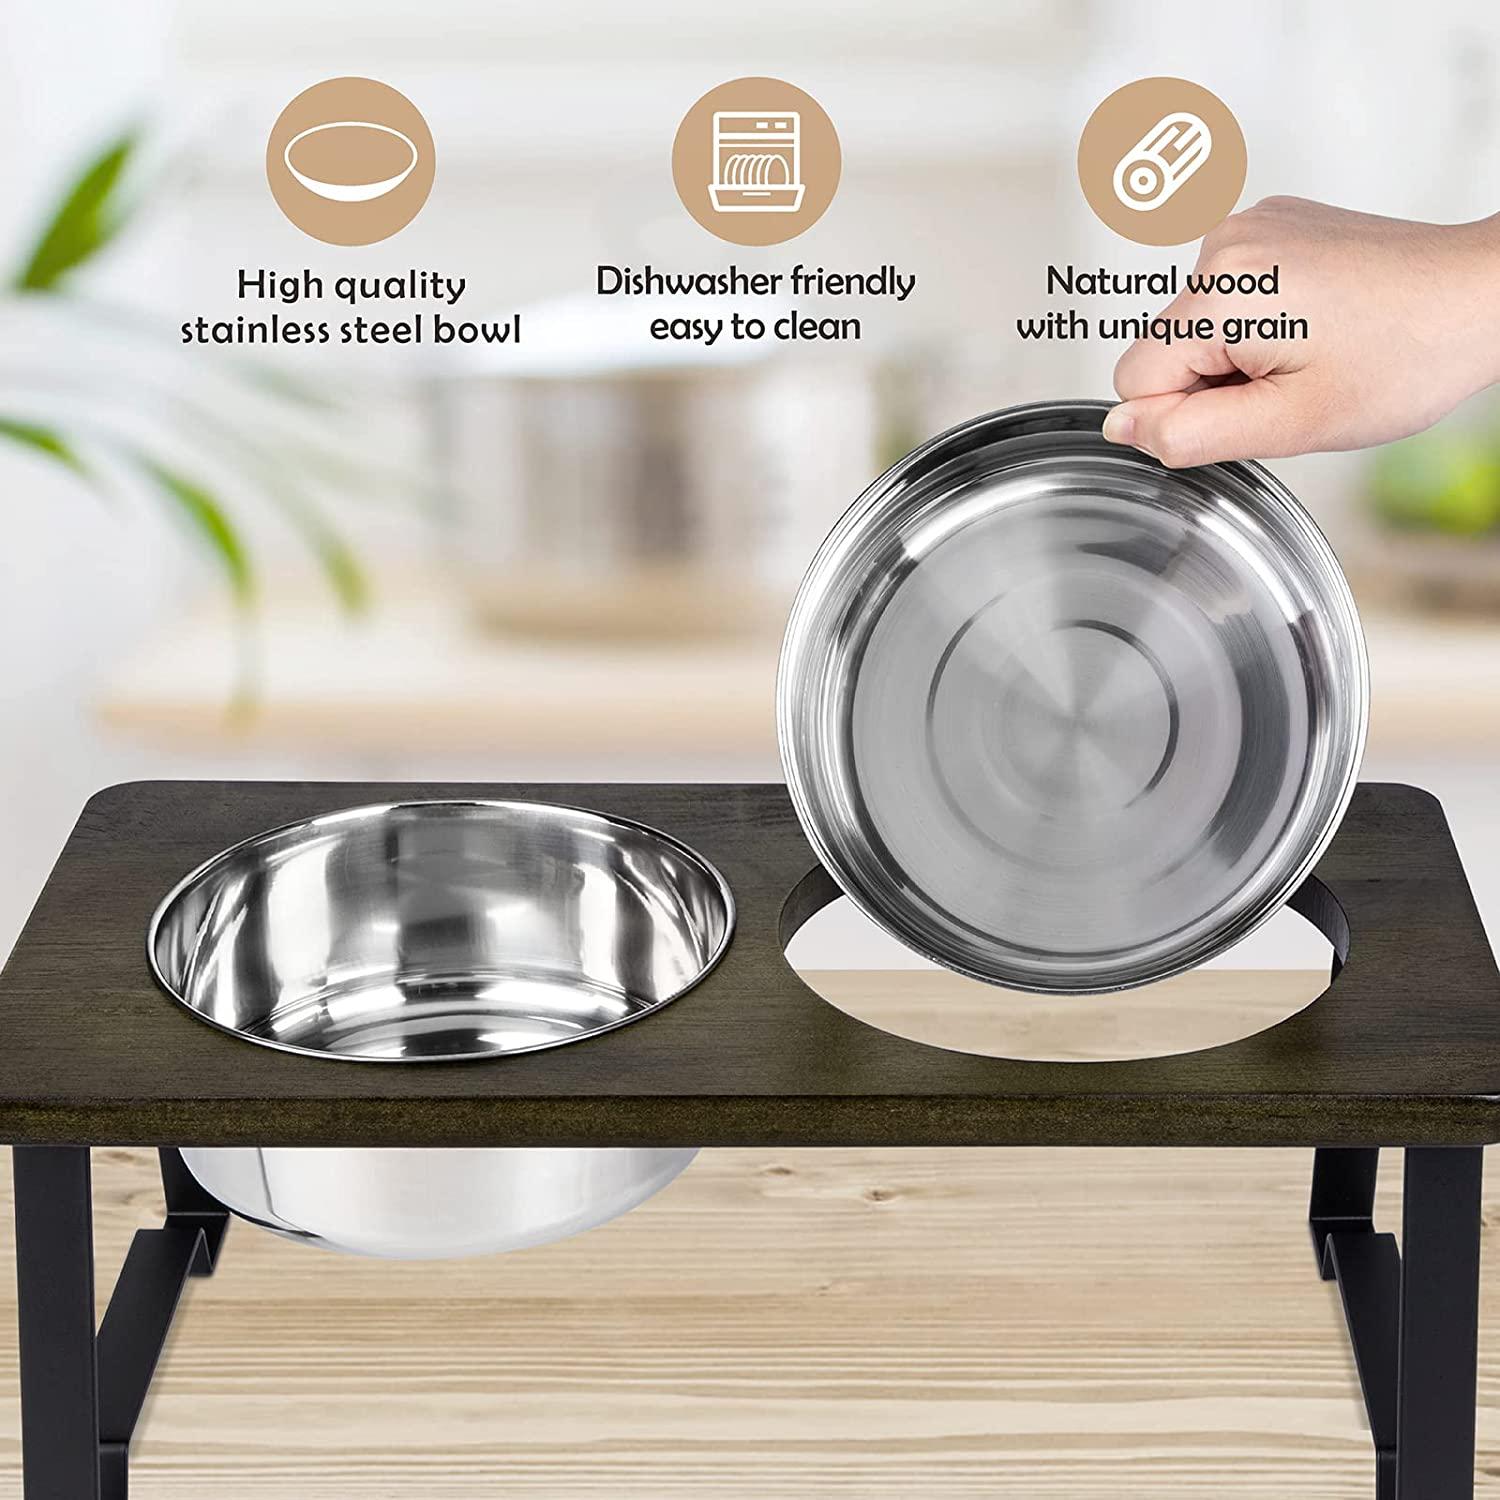 Elevated Dog Bowls for Large Dogs Anti-Slip Raised Dog Bowl Stand, Tall Dog